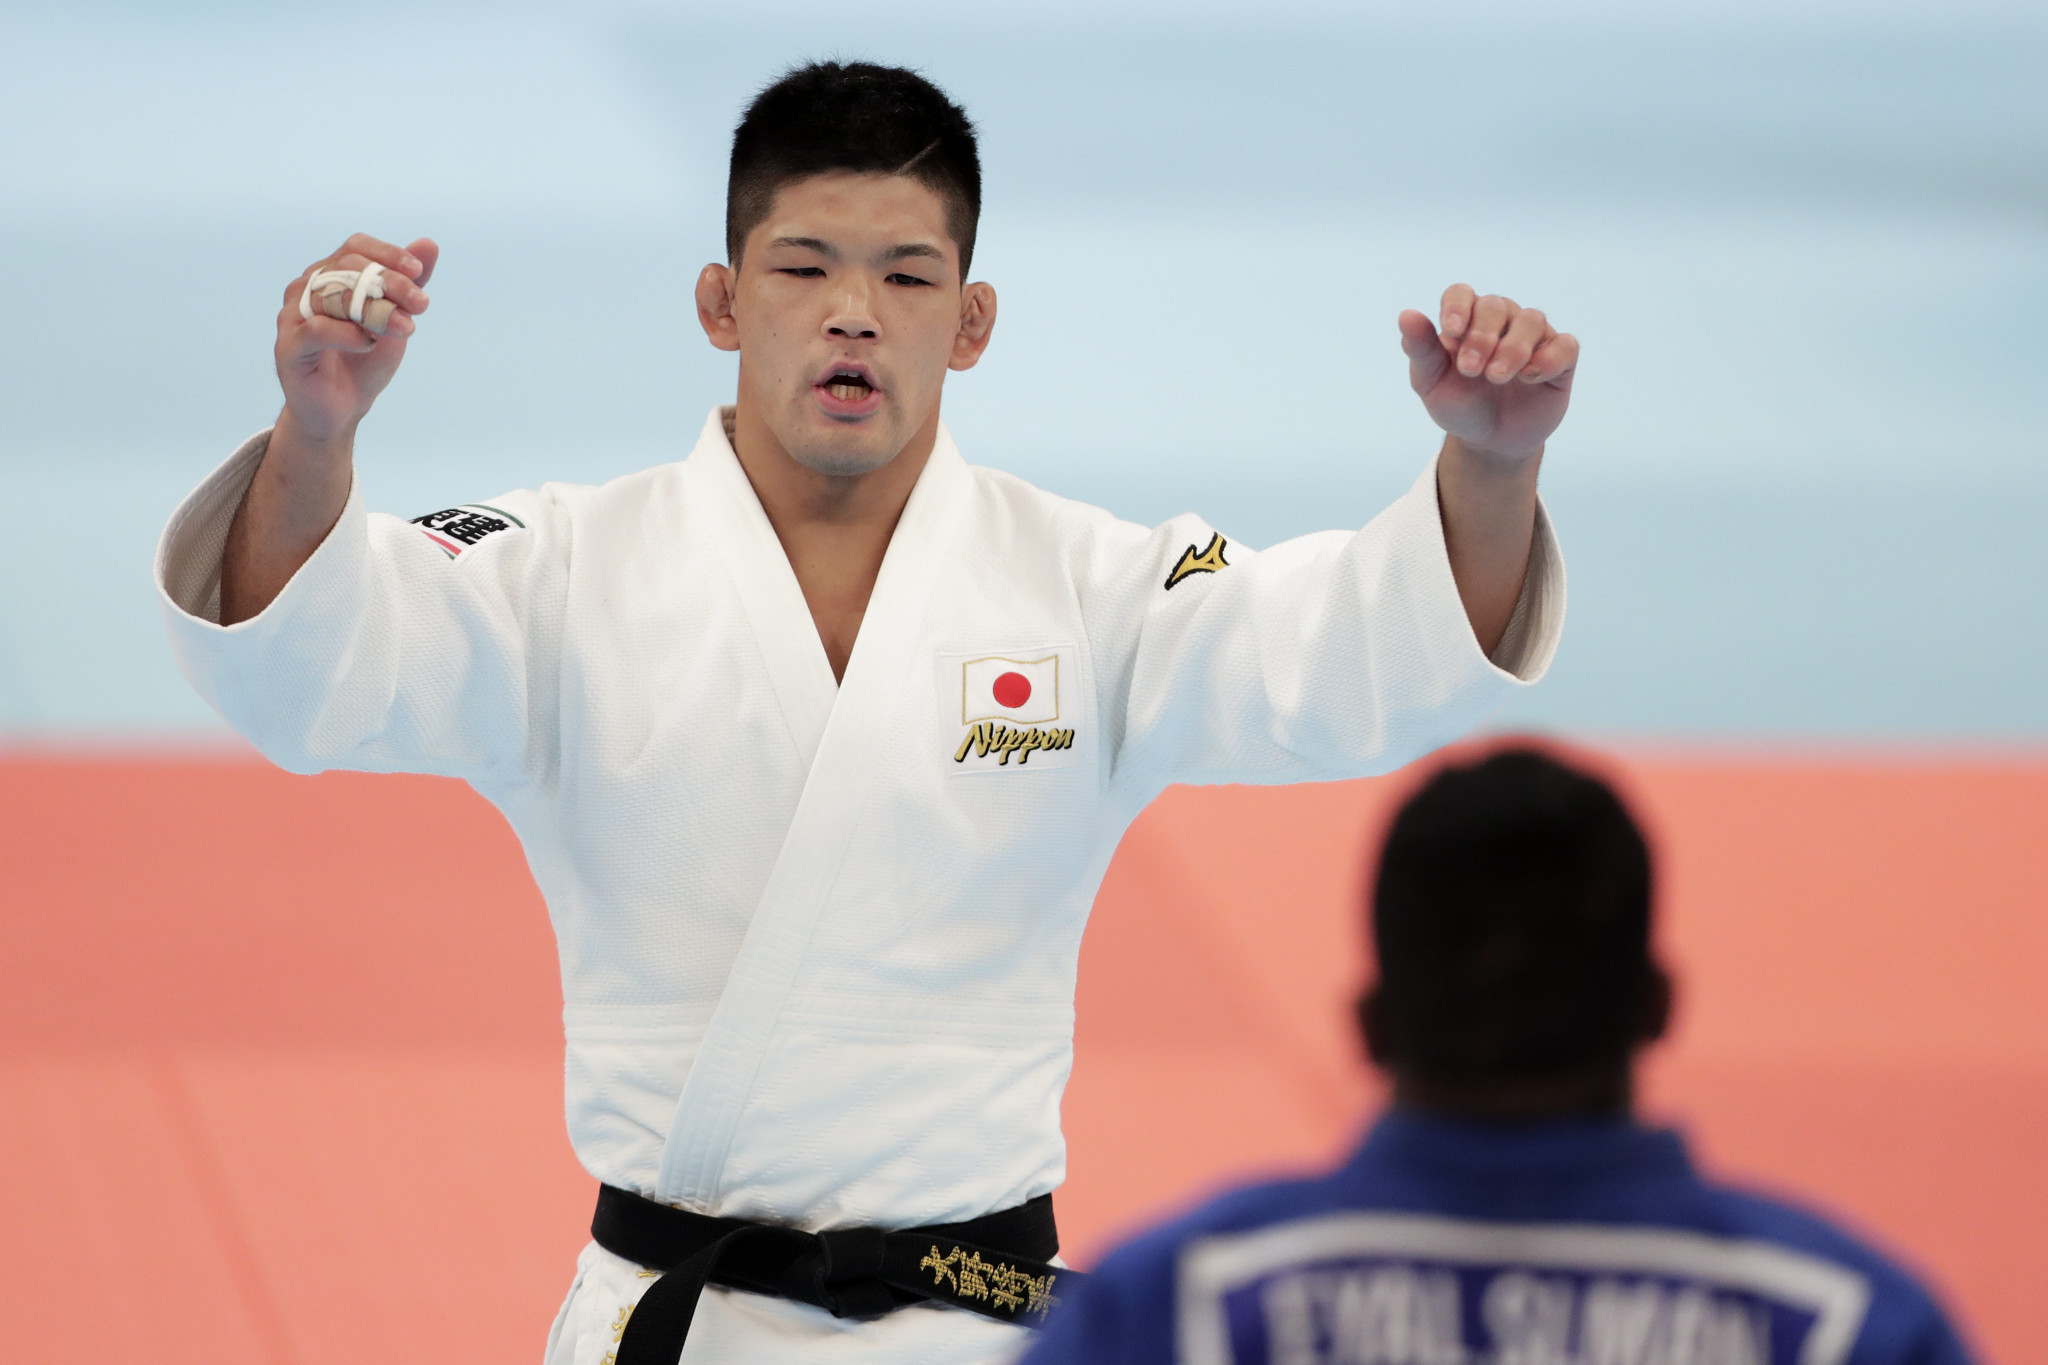 Ono to defend Olympic judo title at Tokyo 2020 